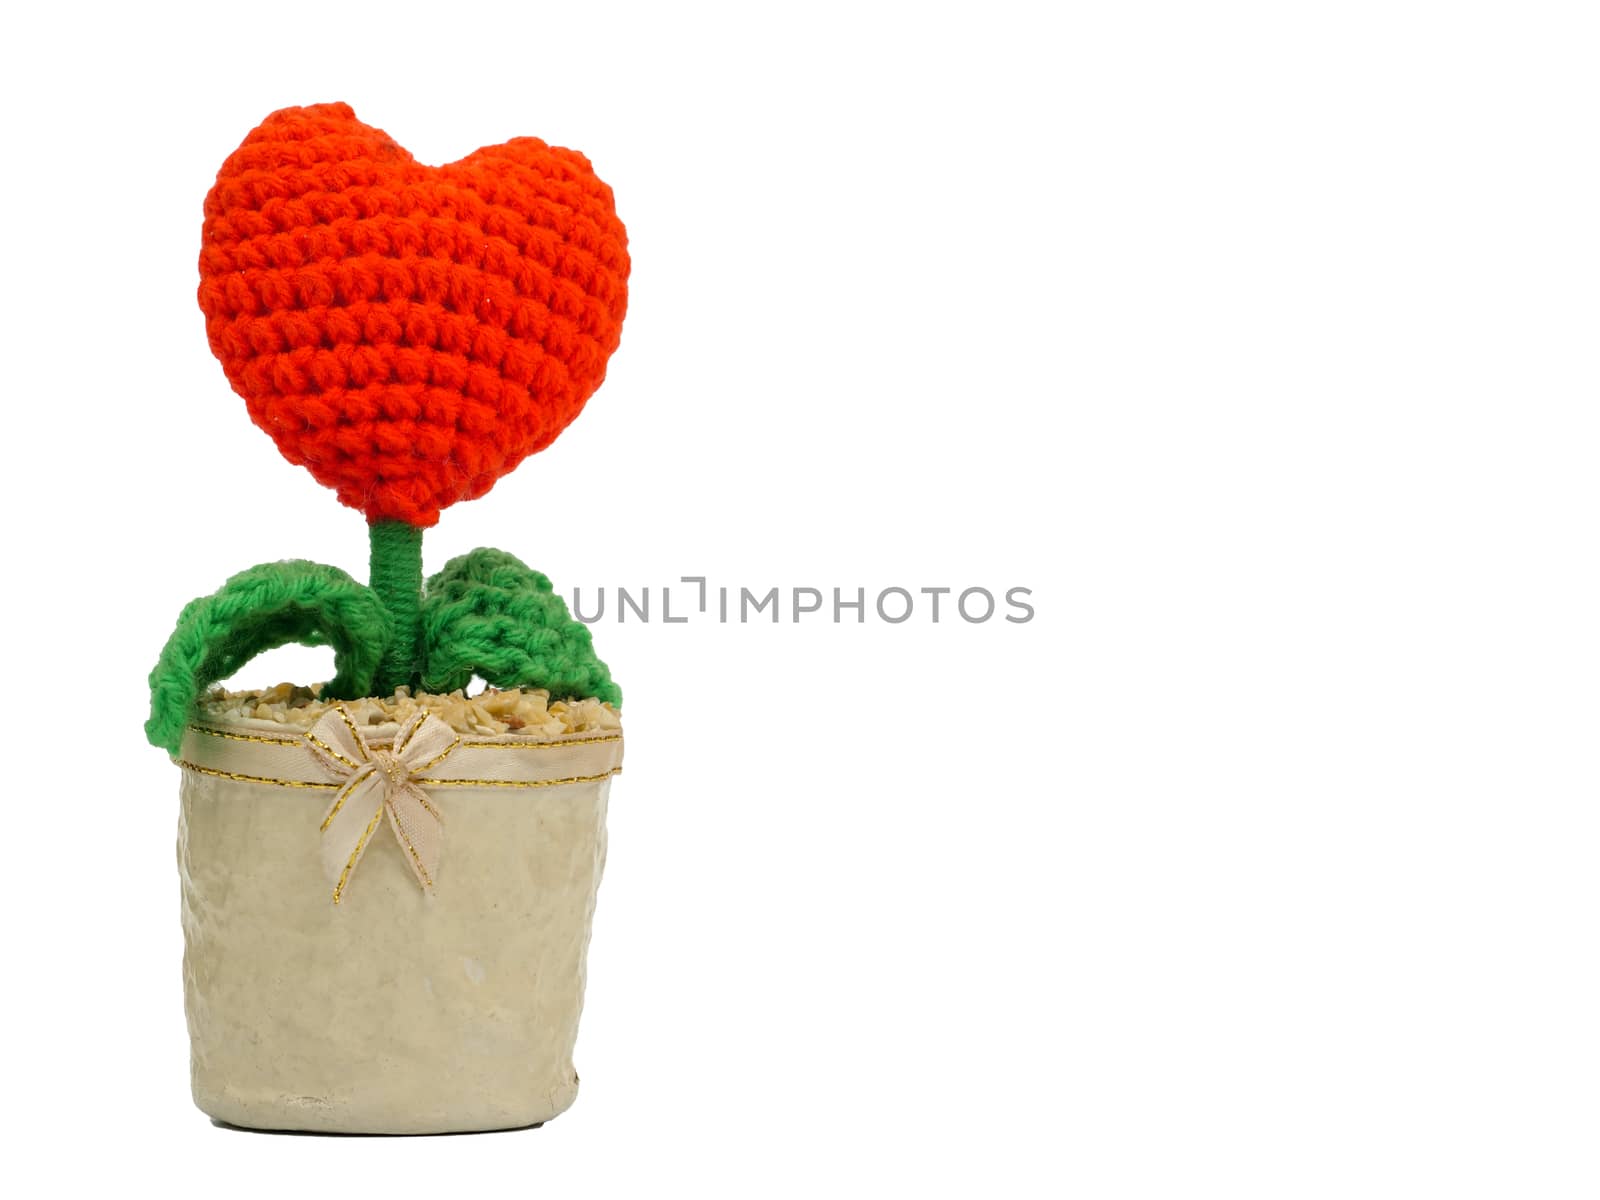 a symbolic love plant made of wool with a heart shape flower in a paper pot, isolated on white background